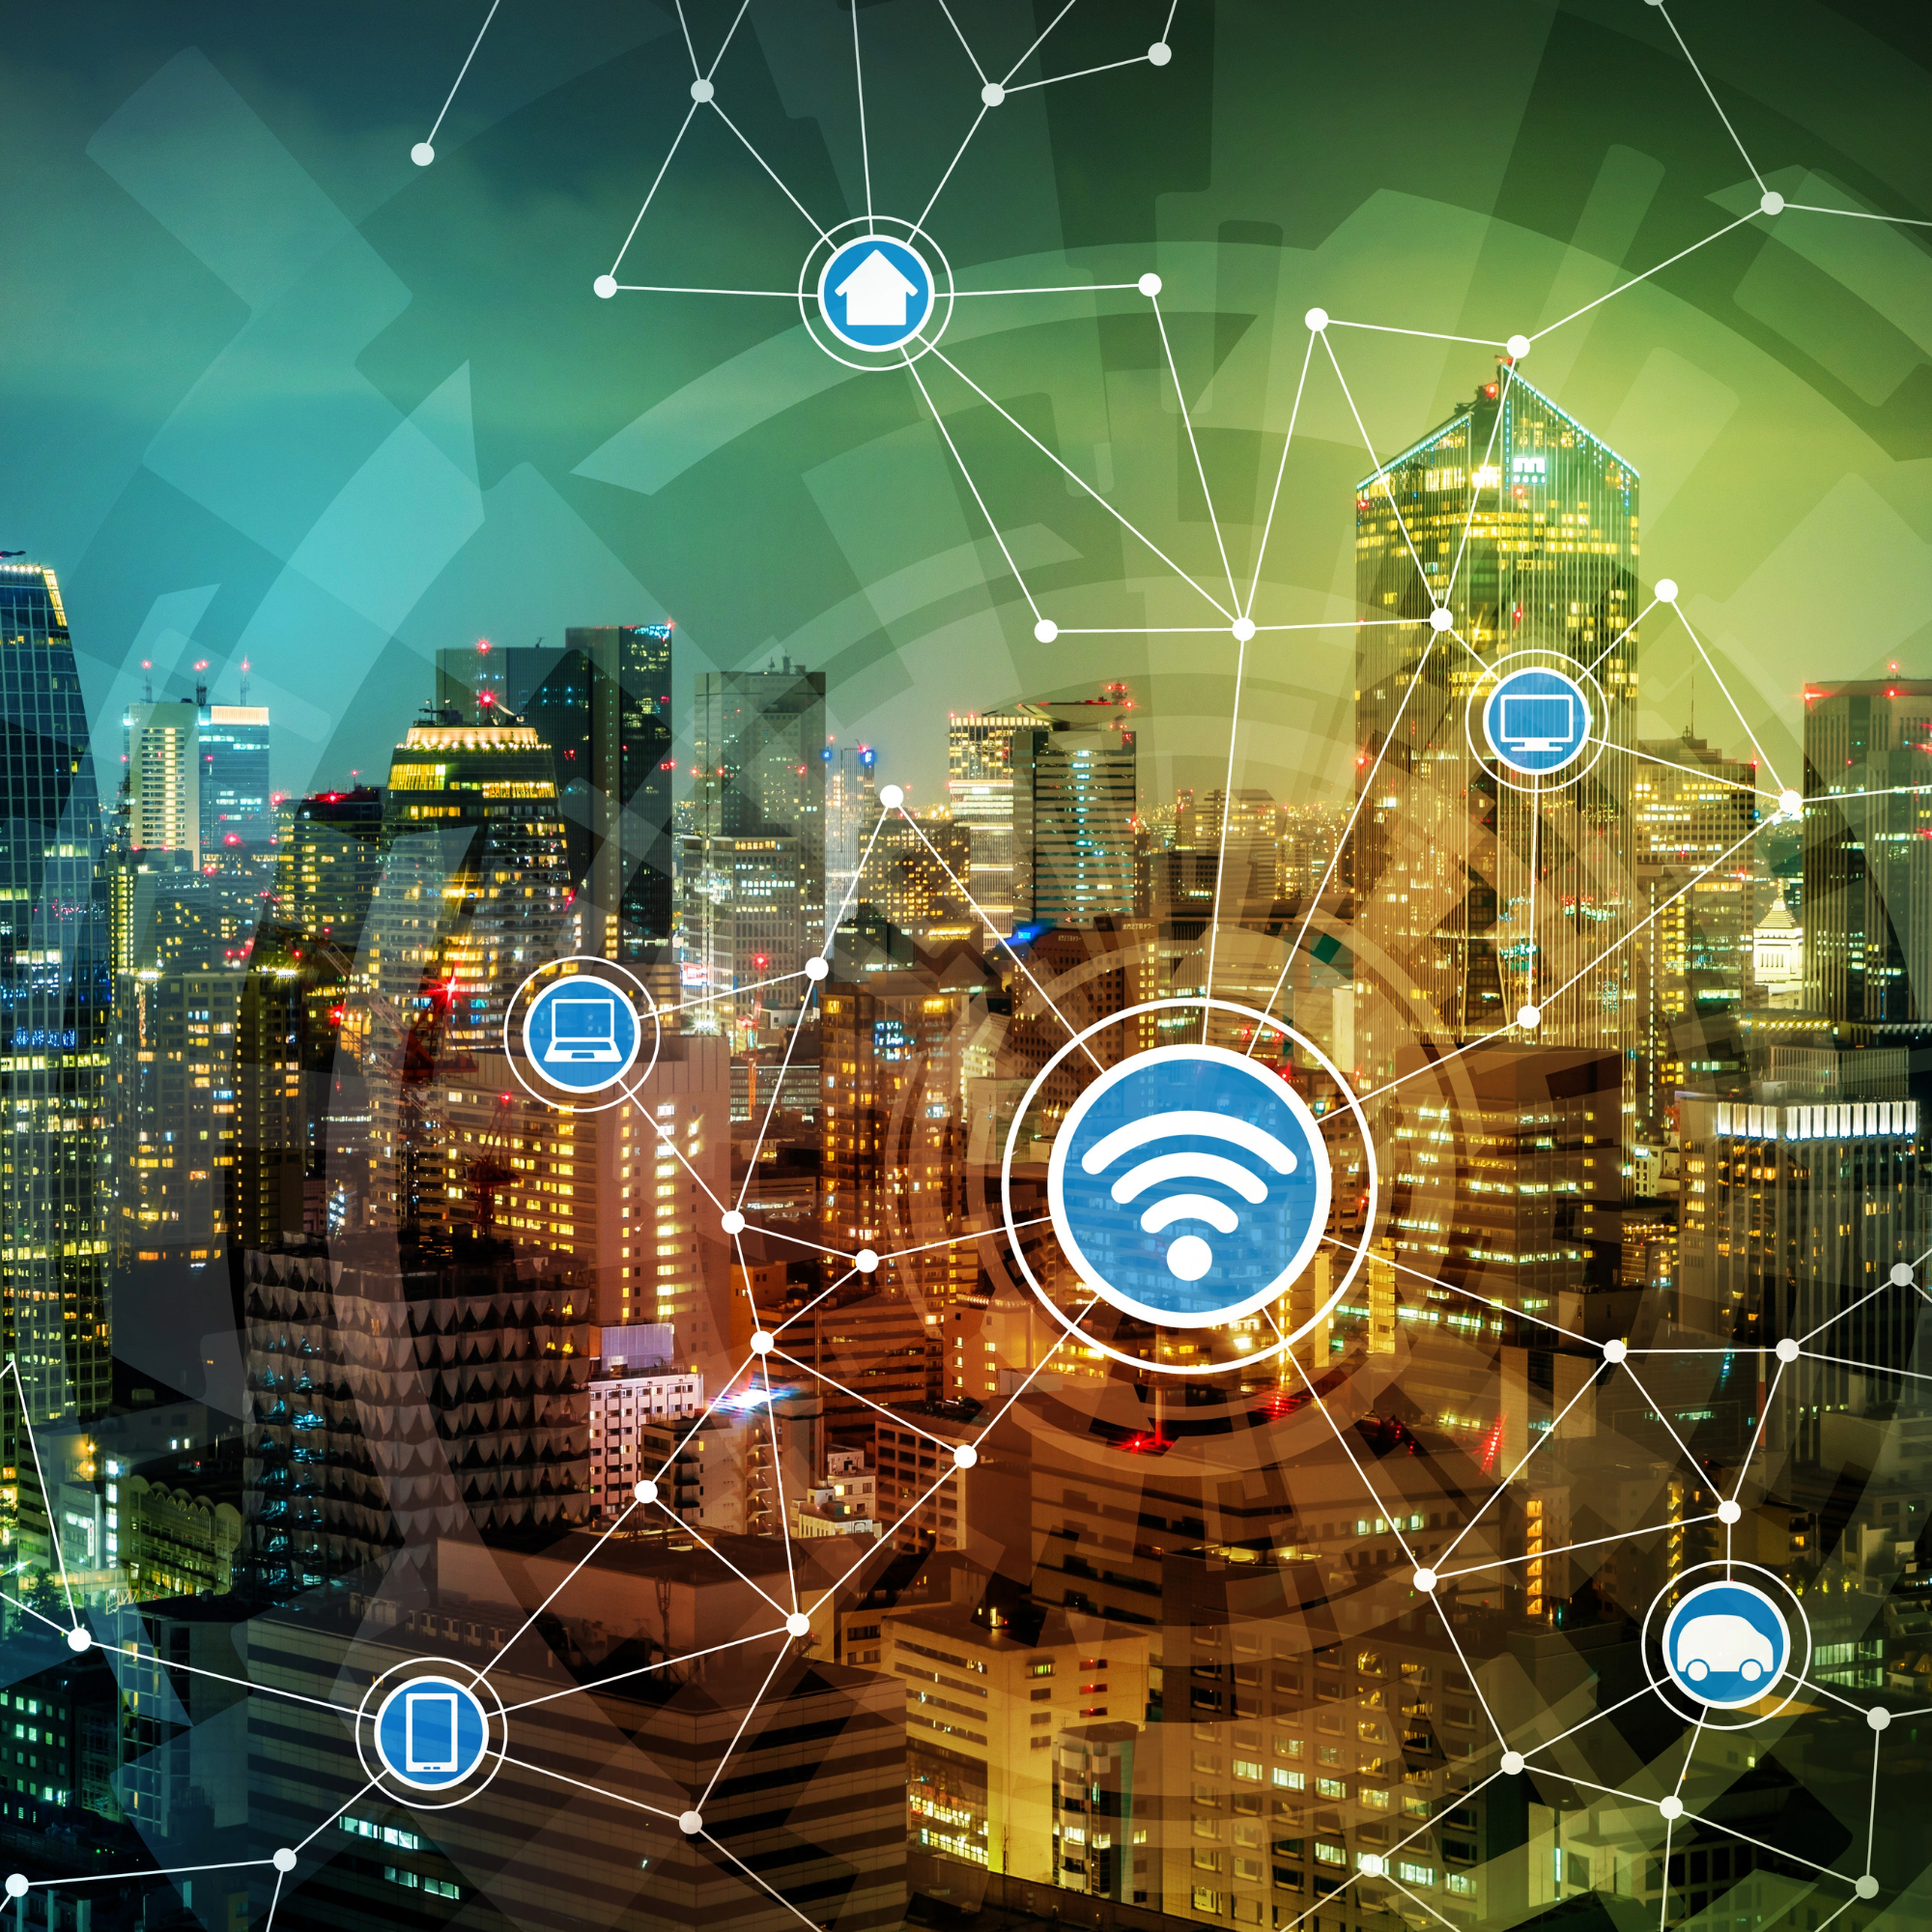 Building Automation with IoT